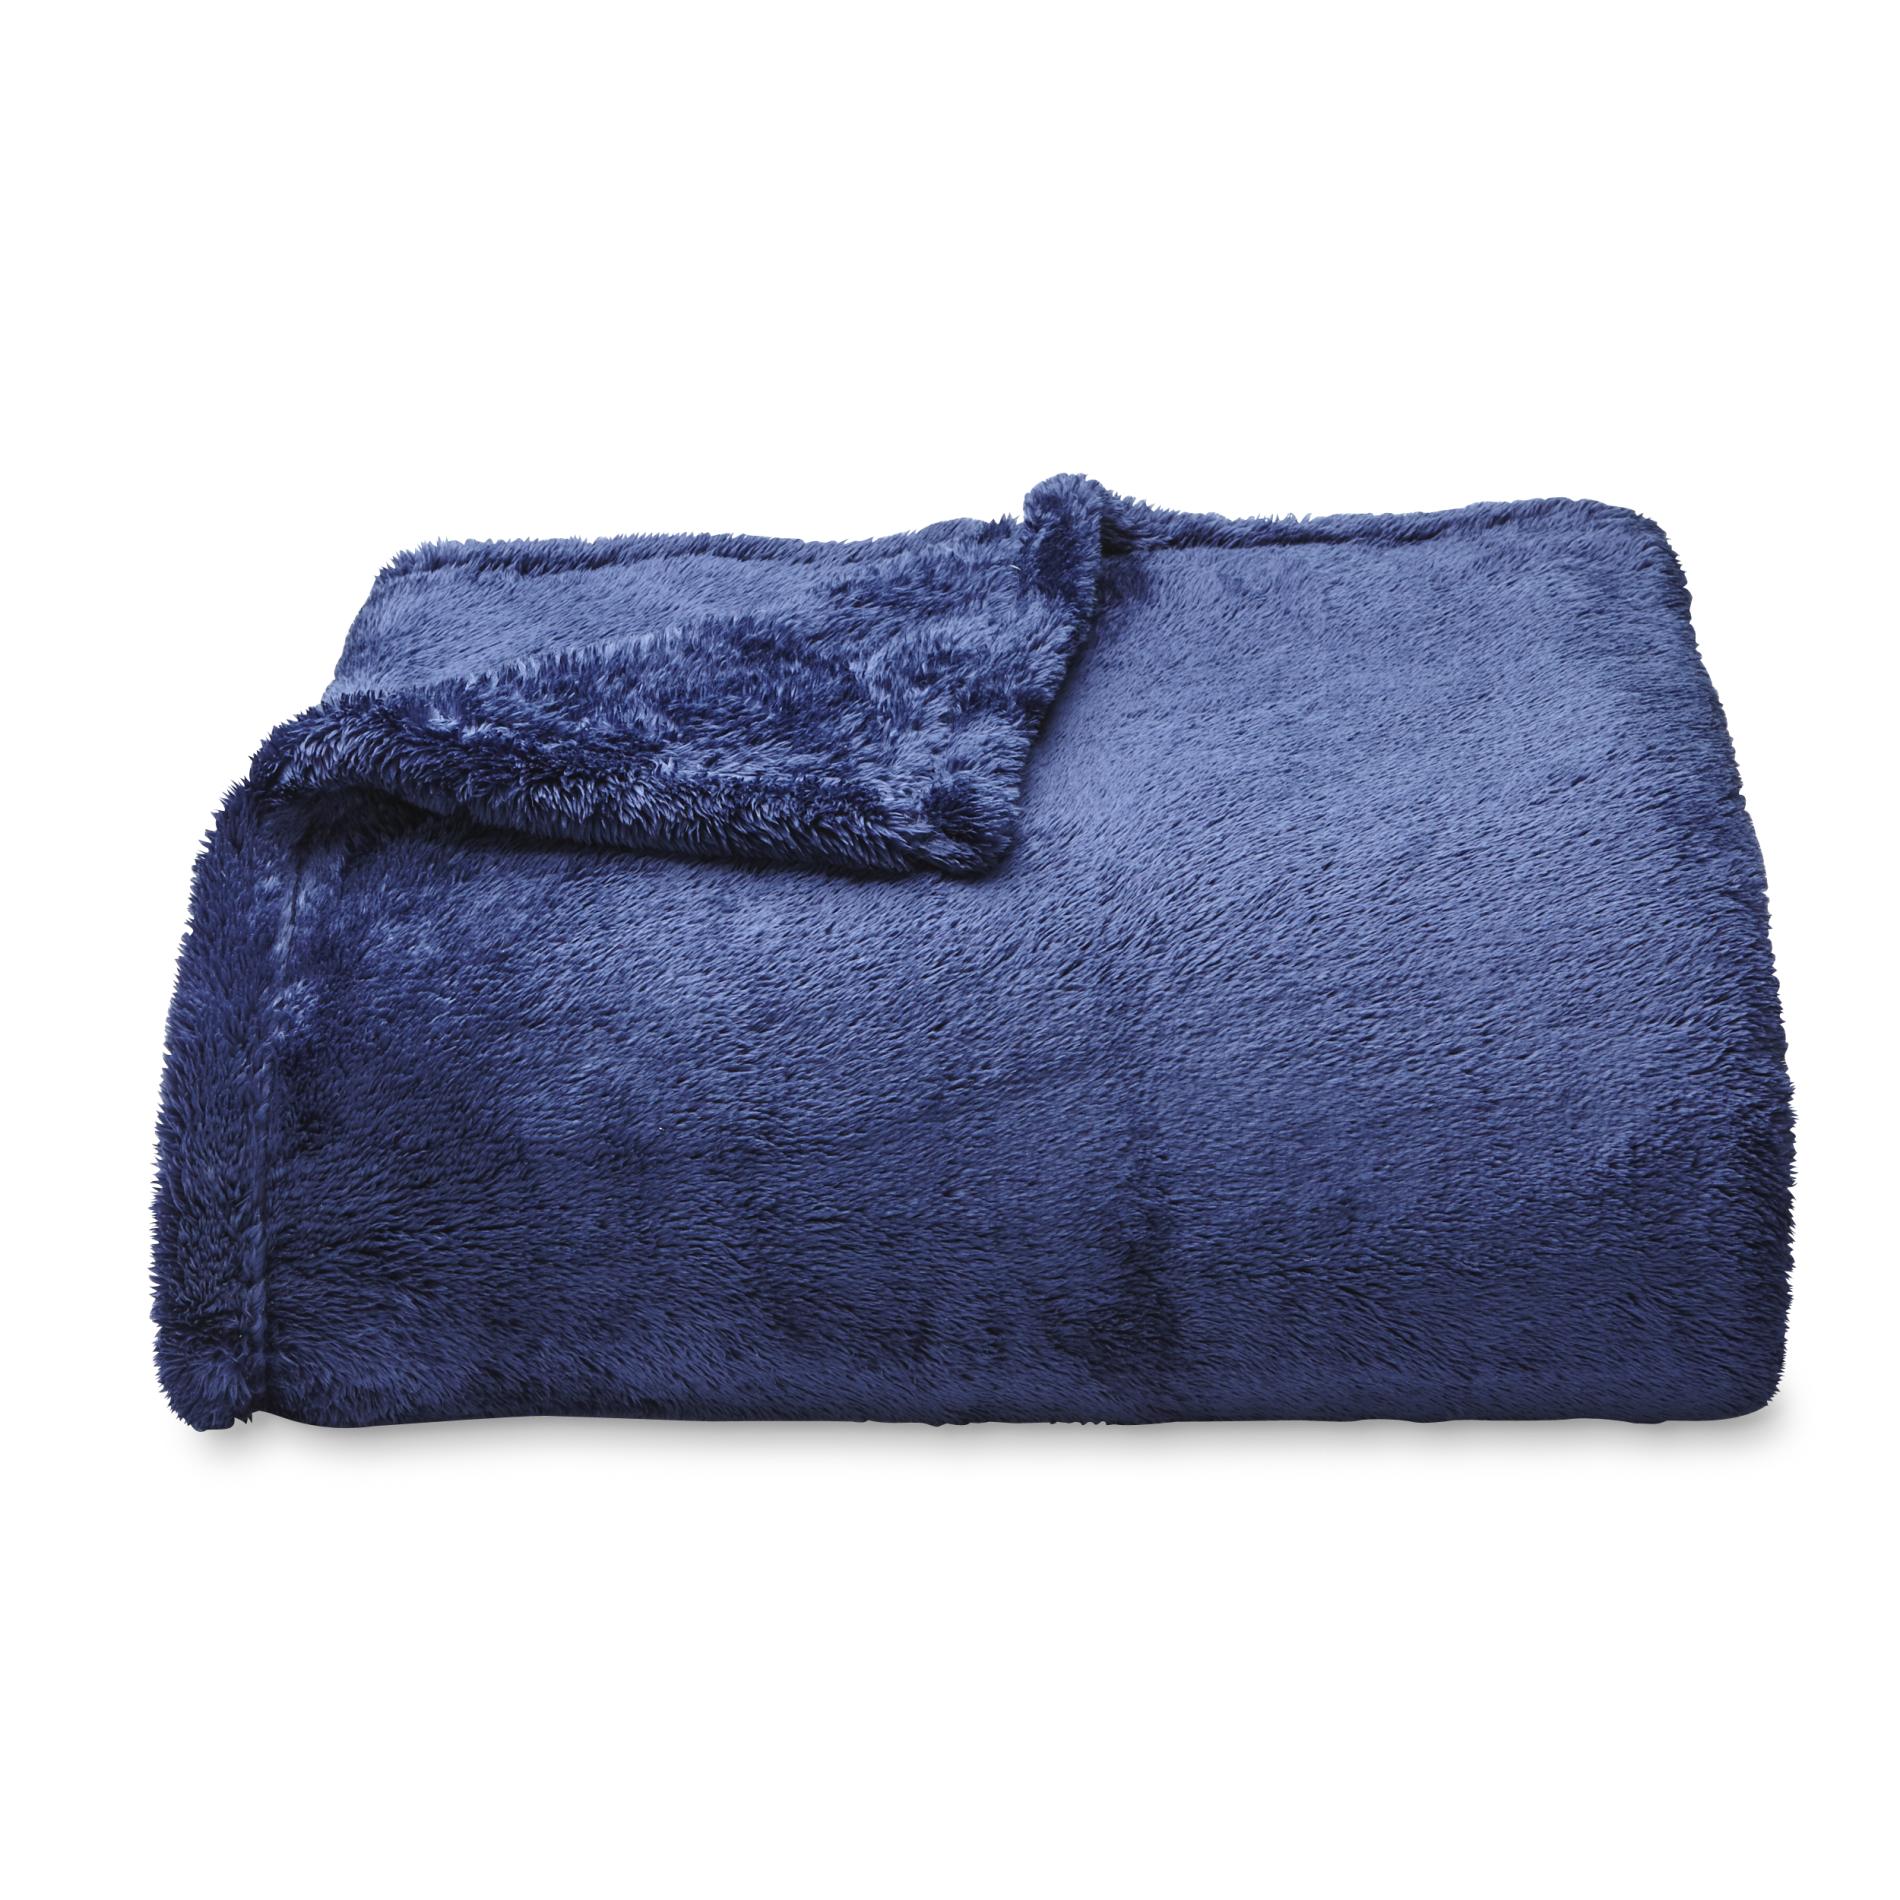 Cannon Oversized Fluffy Throw